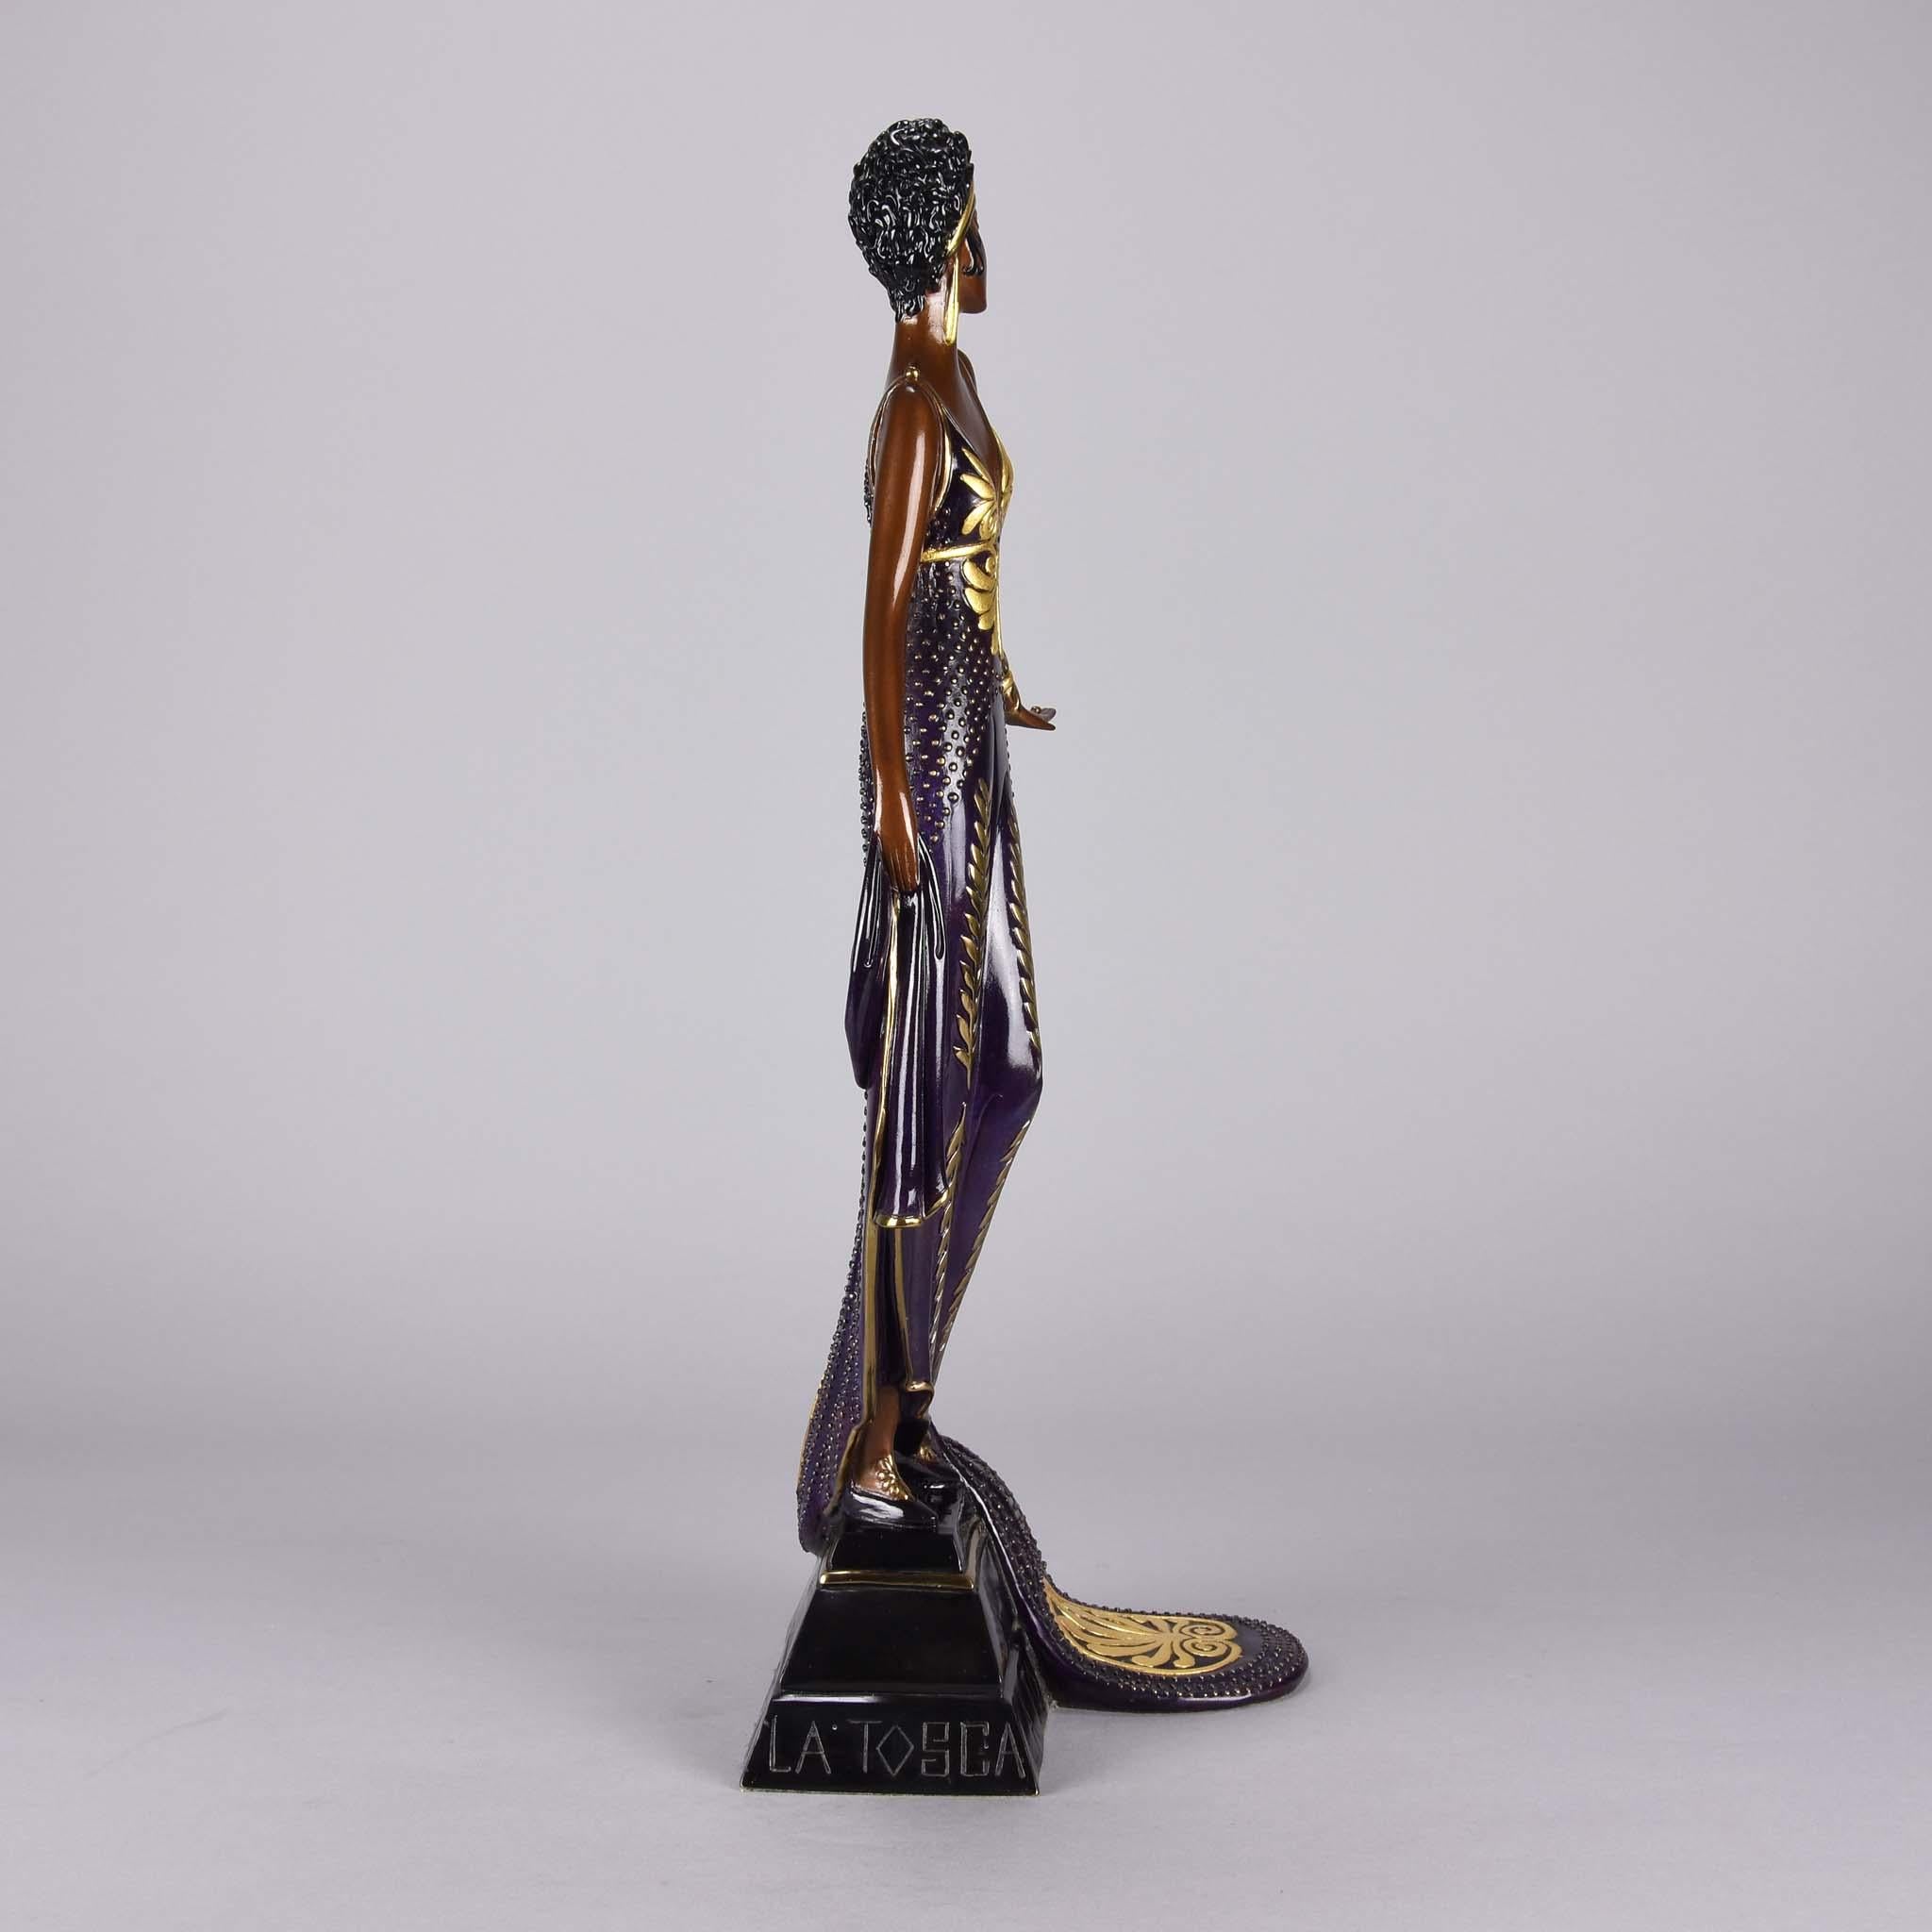 An attractive limited edition cold painted Art Deco bronze figure of an elegant beauty dressed in a purple full length gown with excellent color and detail, signed Erté, numbered 145/500, dated 1989 and with foundry mark.


Erté (Romain de